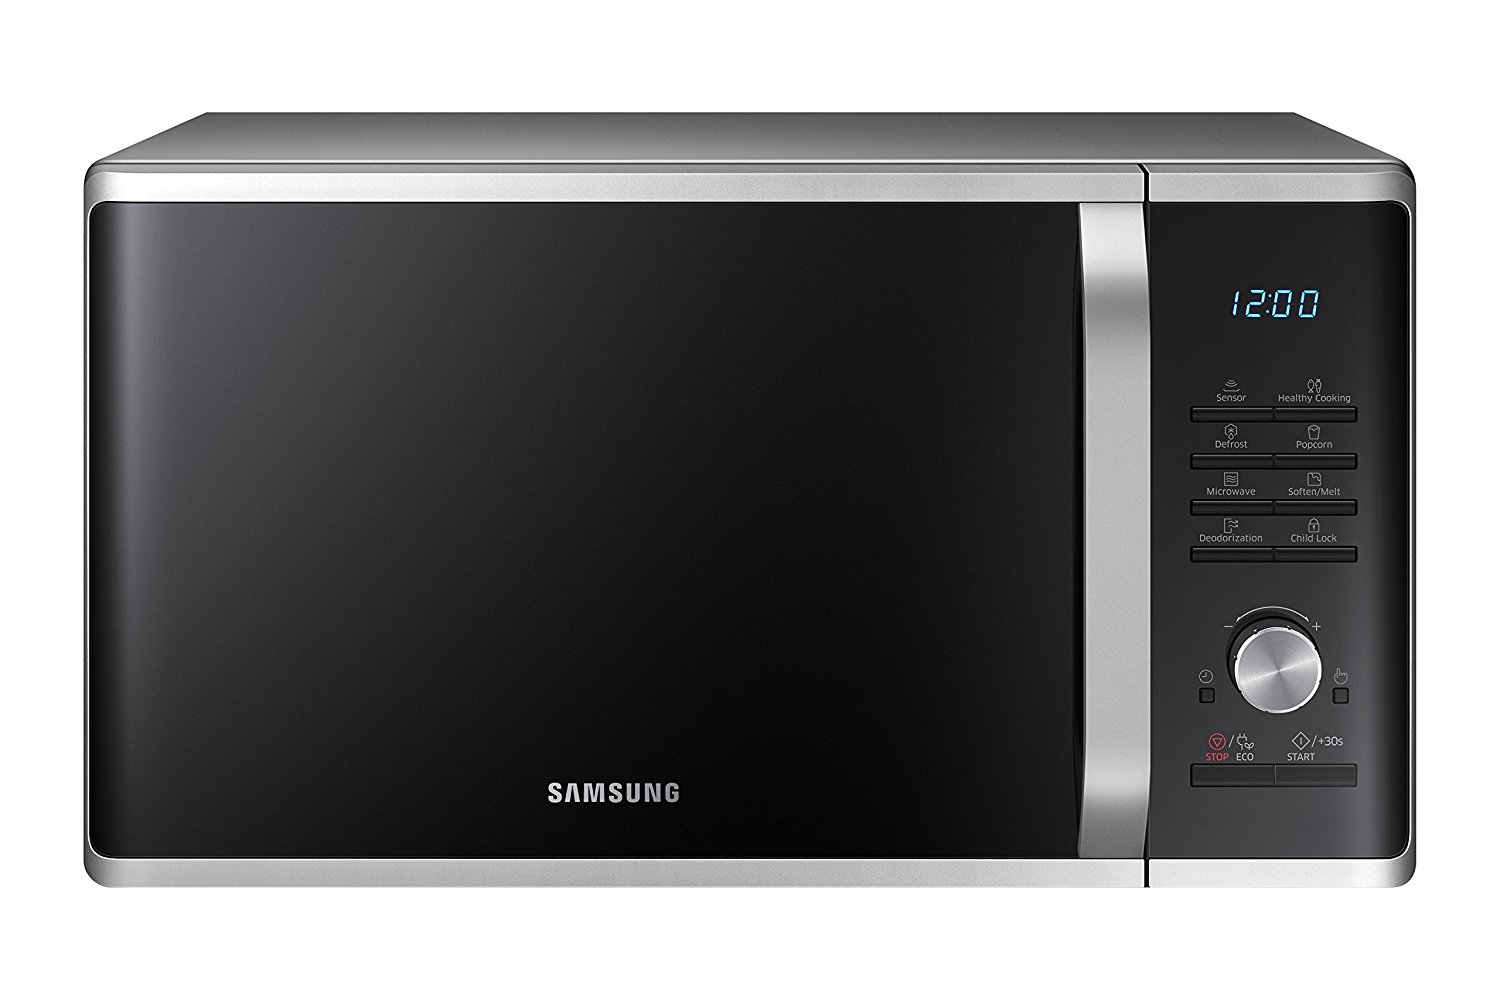 Samsung MS11K3000AS 1.1 cu. ft. Countertop Microwave Oven with Sensor and Ceramic Enamel Interior, Silver Sand